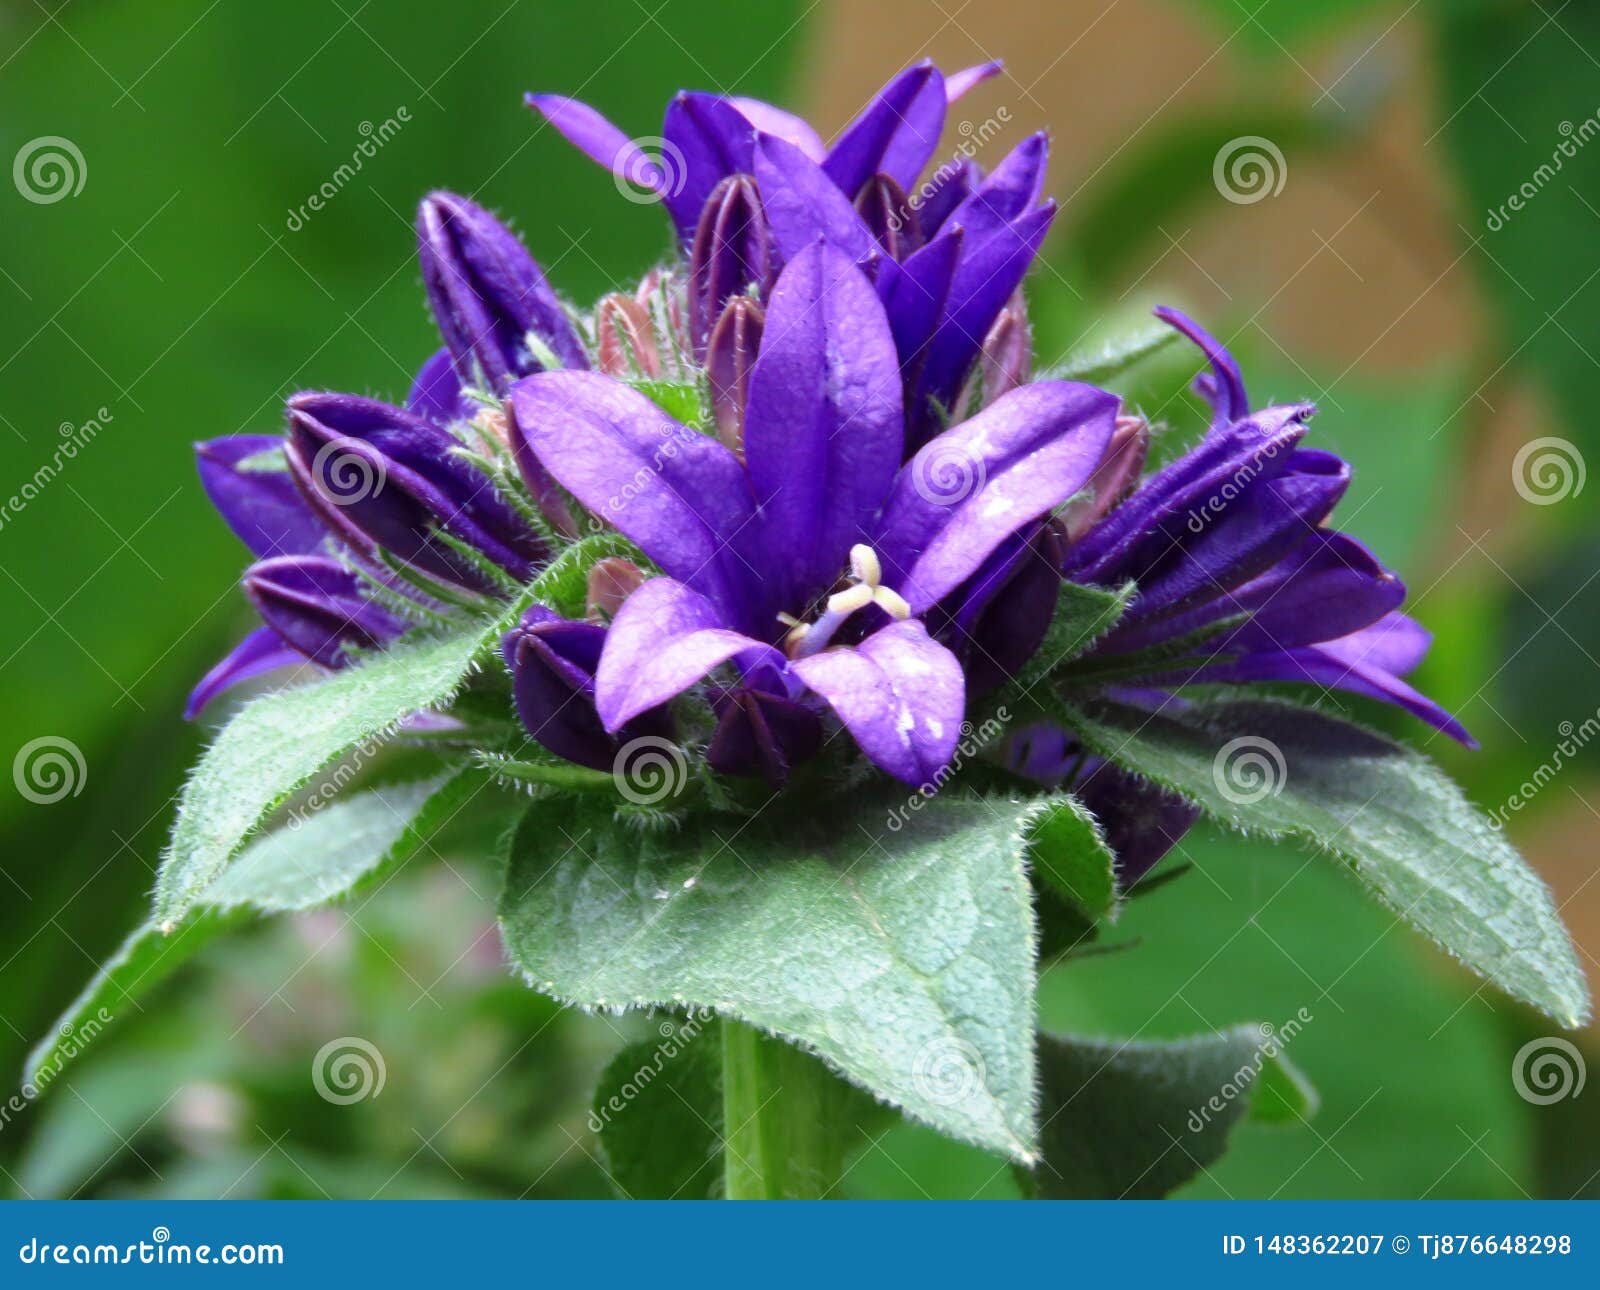 close up of campanula glomerata `superba` flower. blue garden flowers with green leaves.